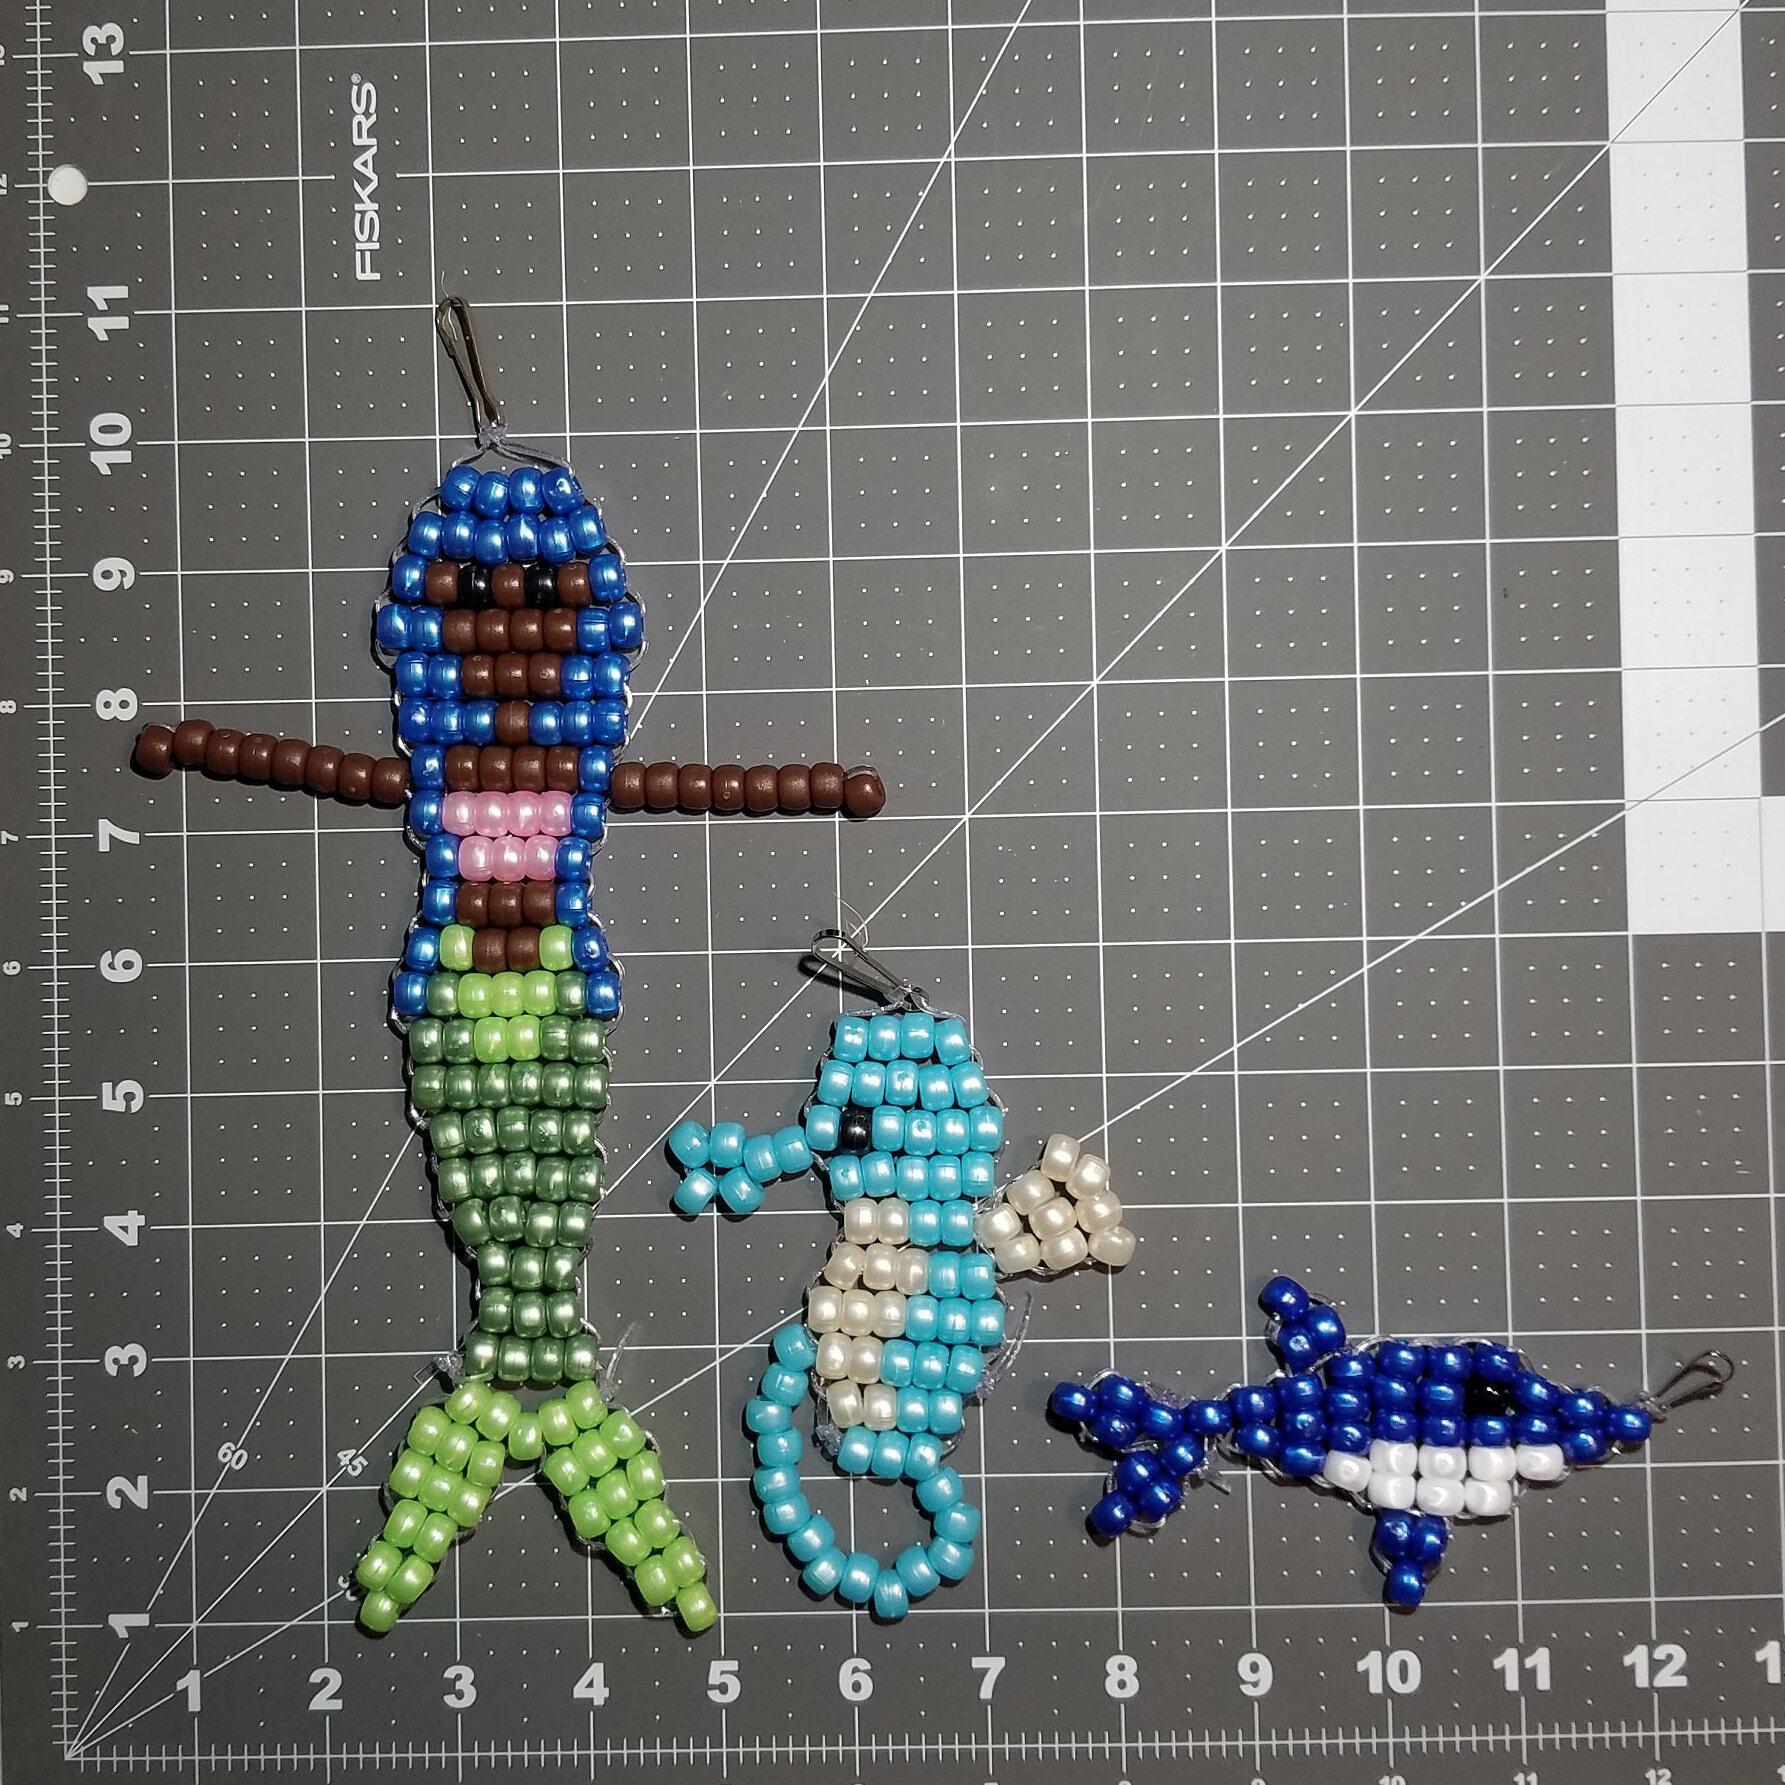 5. Made By Me Bead Pets